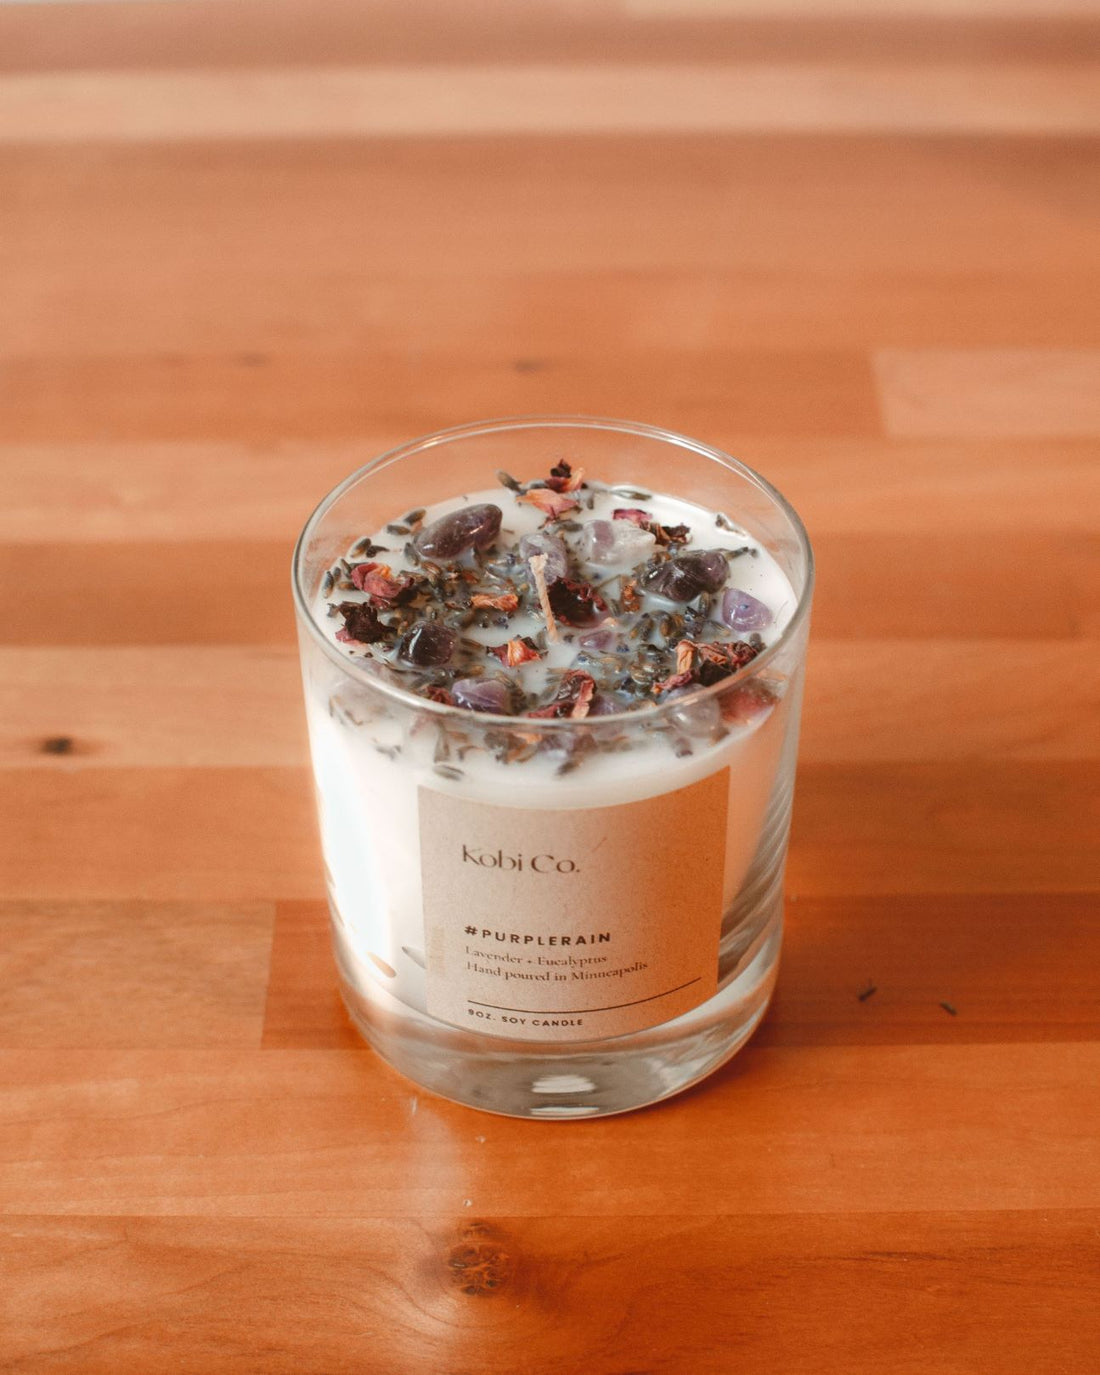 Burning Romance Candle – Life in Lilac